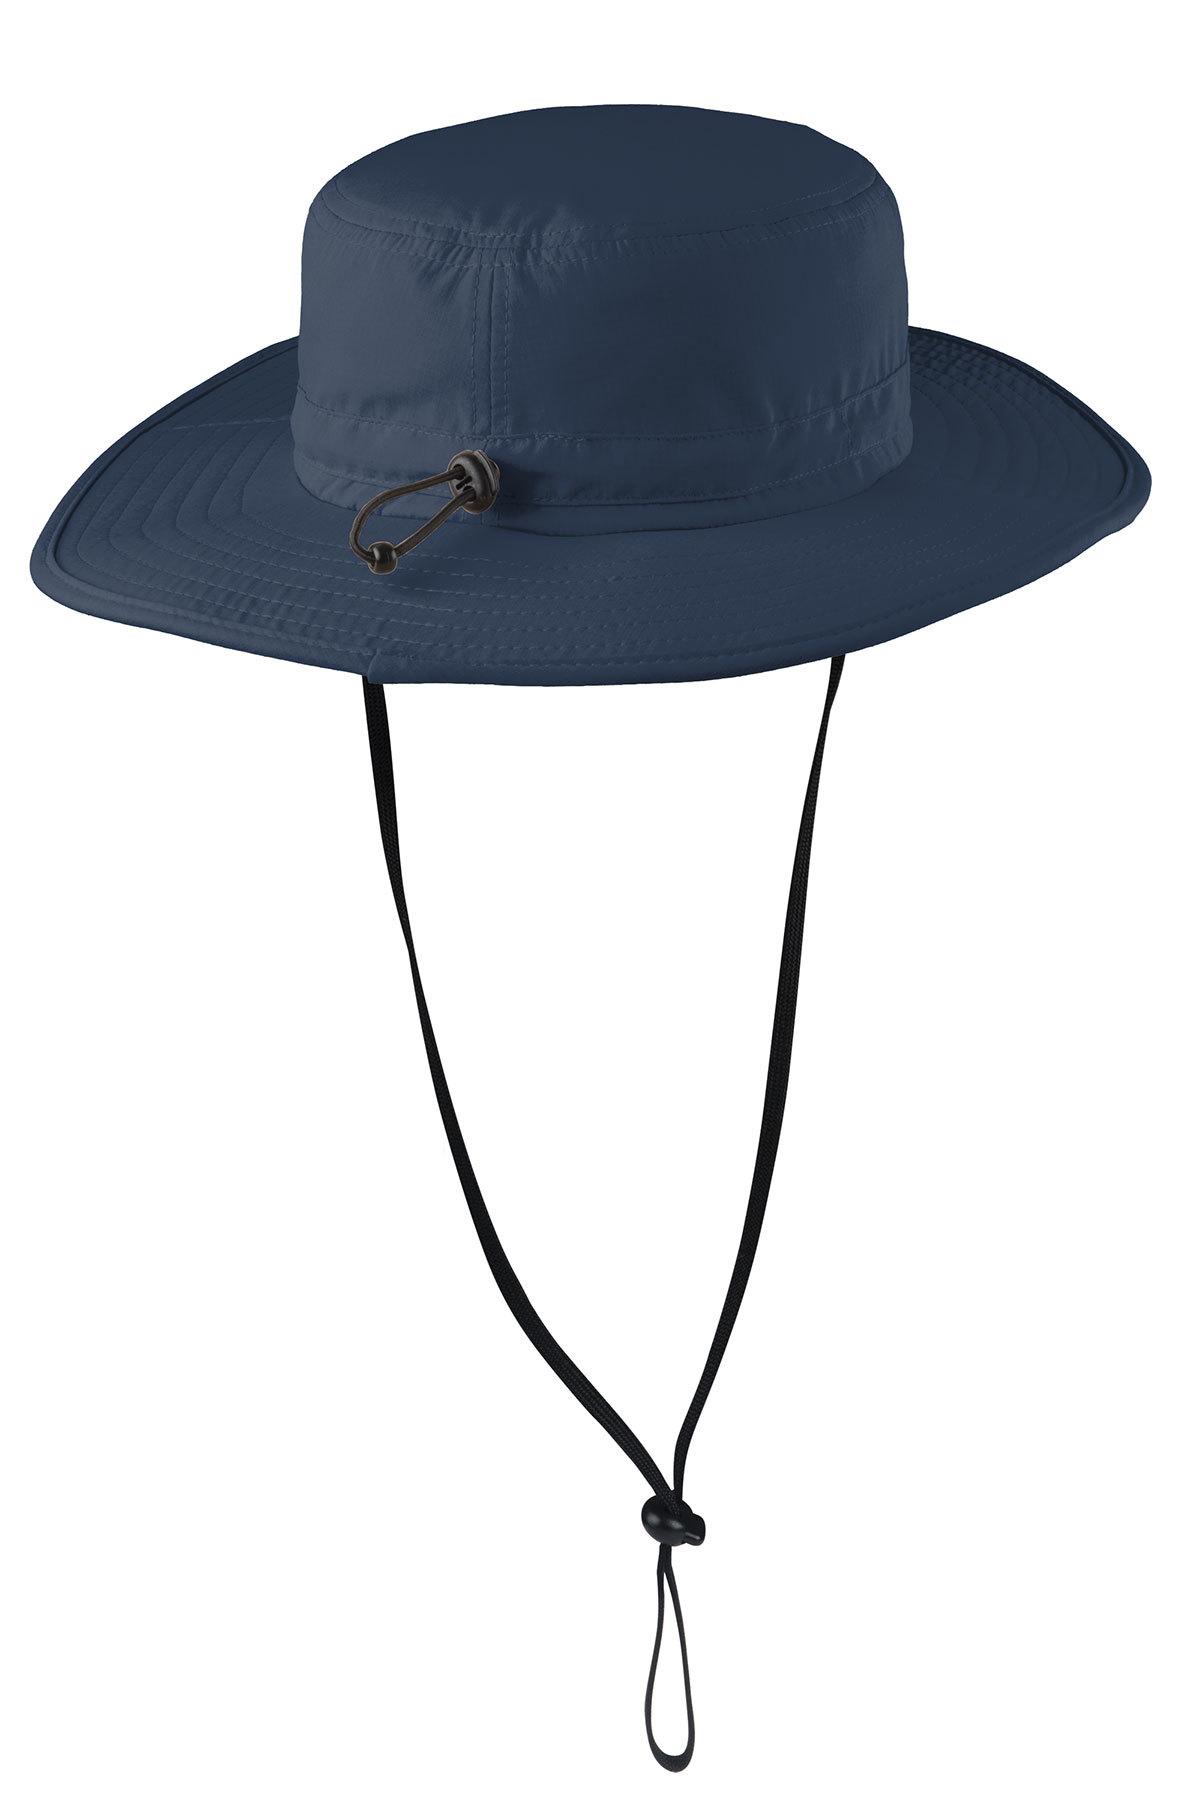 Port Authority Outdoor Wide-Brim Hat, Product